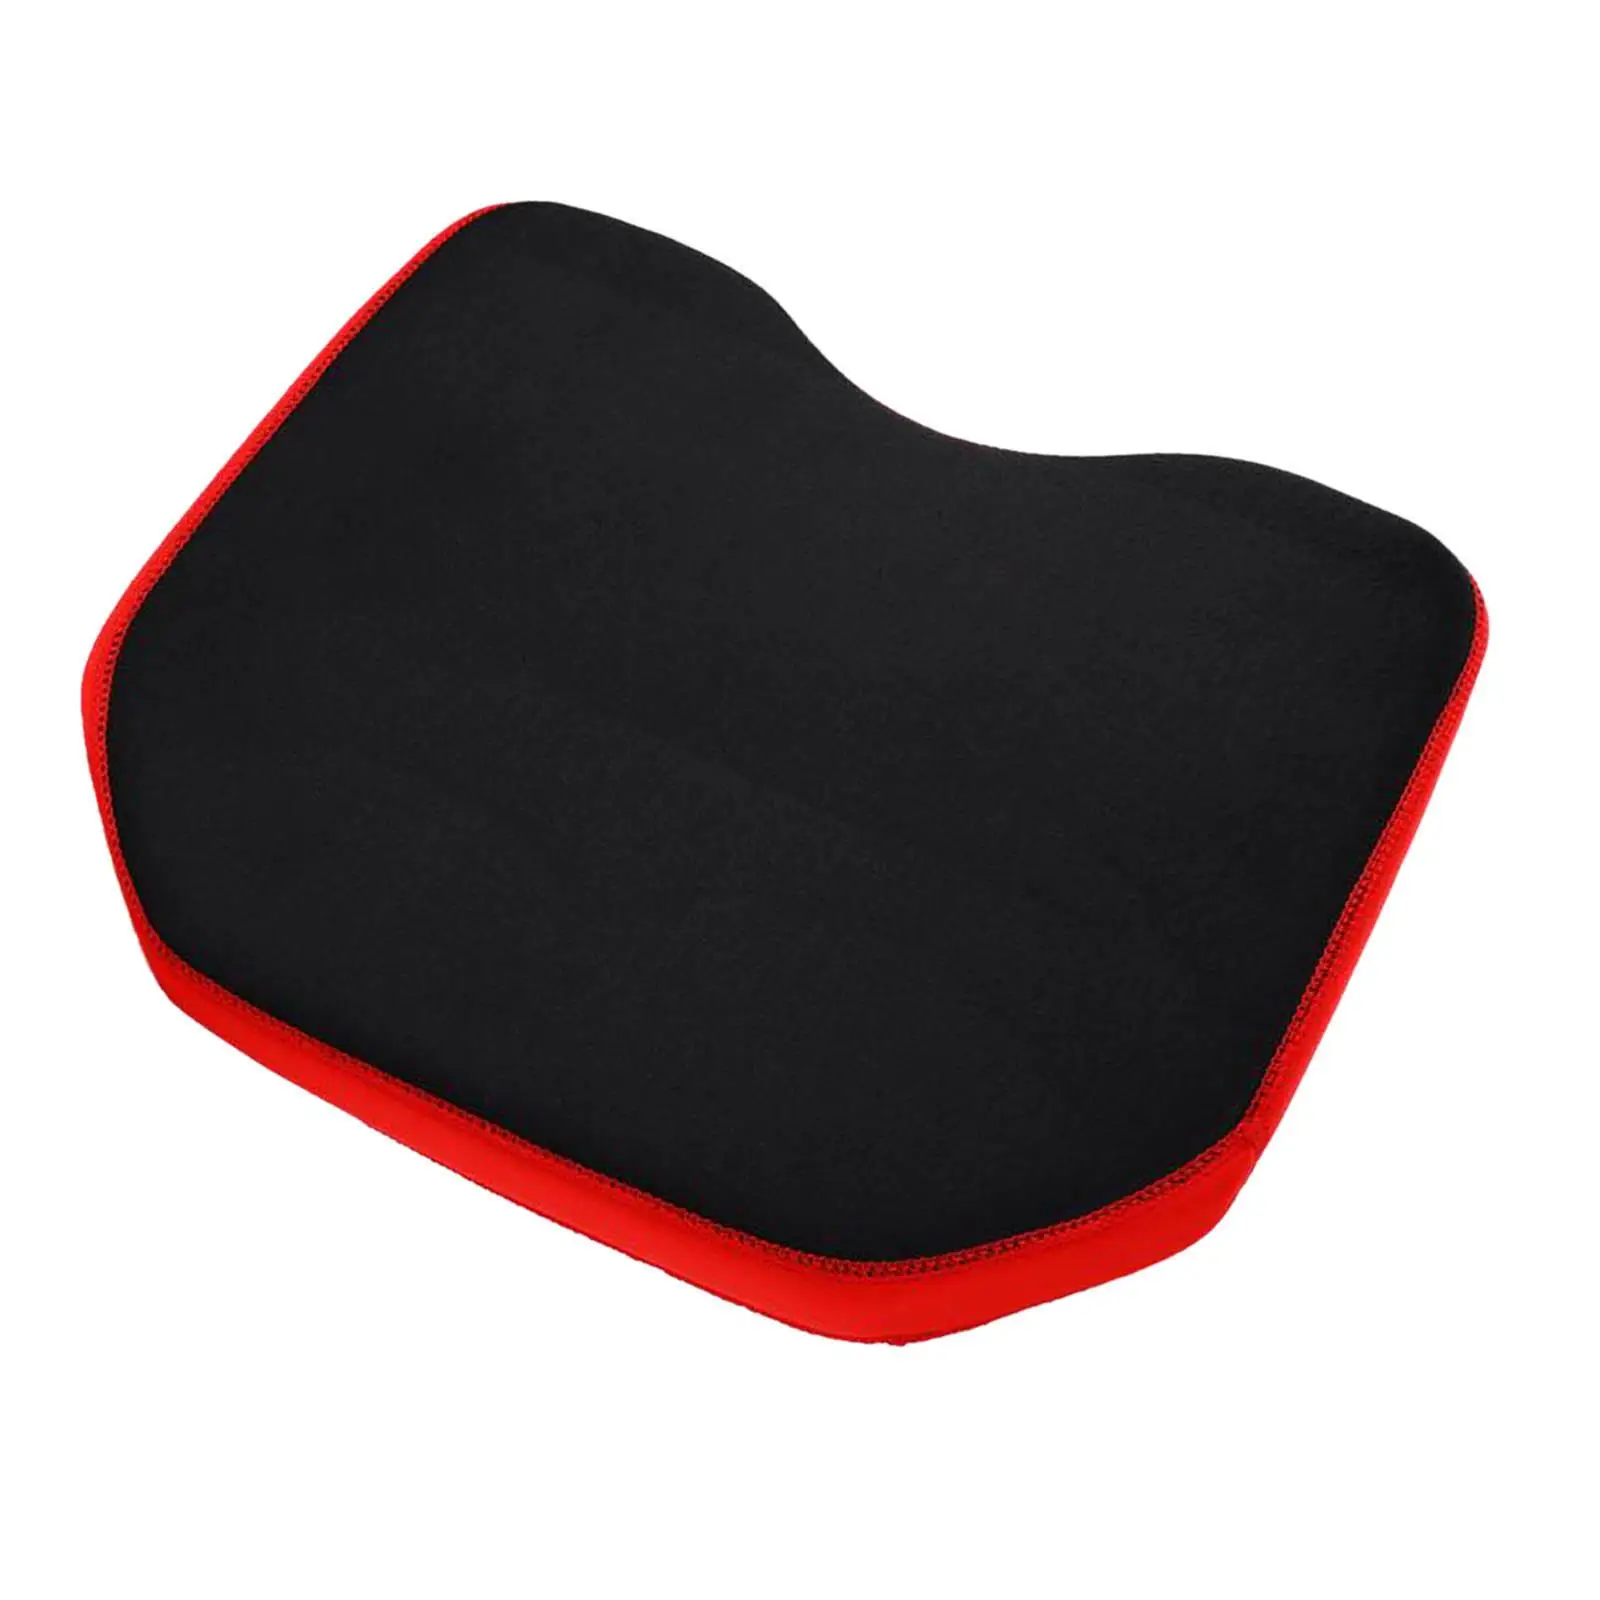 Rowing Boat Seat Soft Pad Sucker Sun Dolphin for Canoe Kayak Outdoor Boats Sports